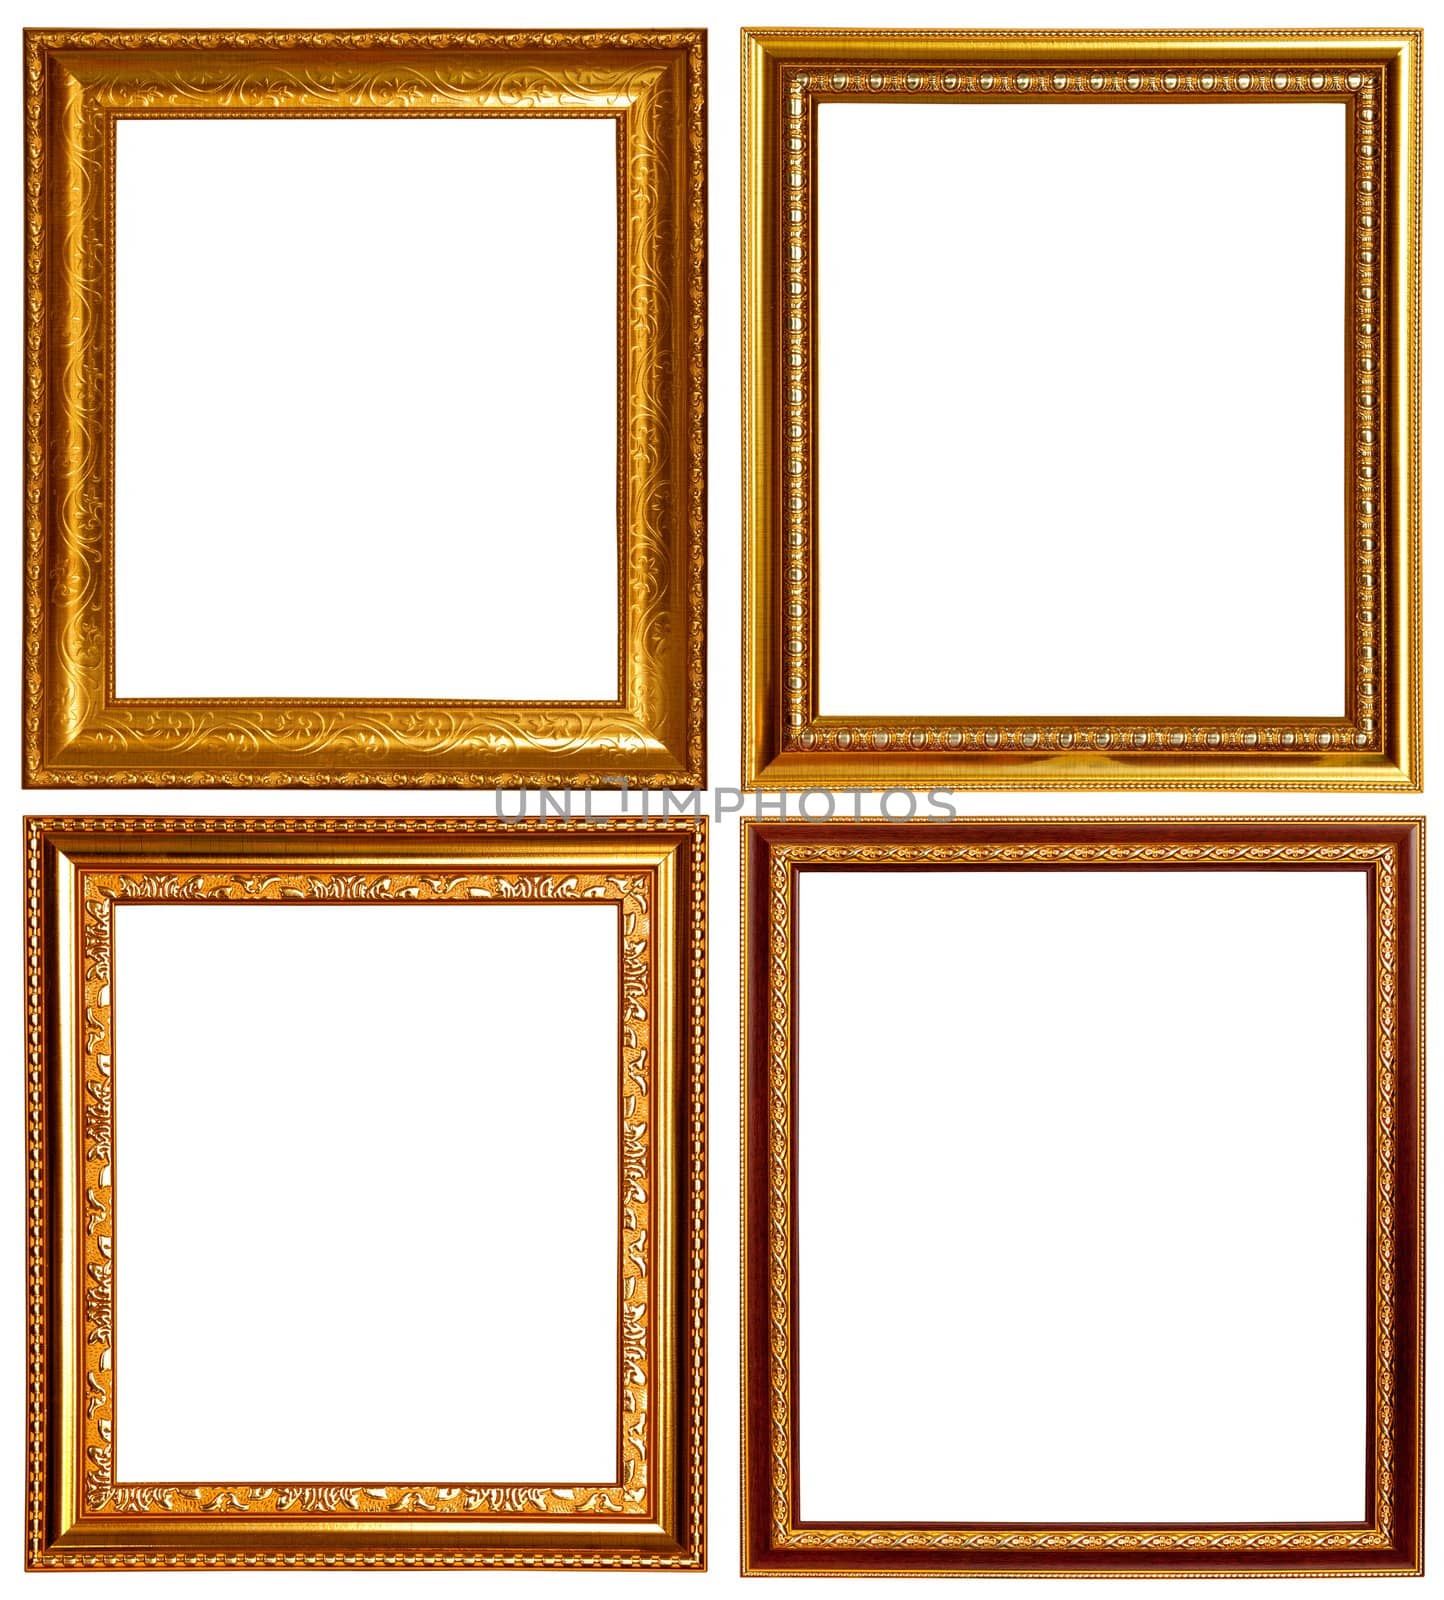 Gold and wood frame Collection on white background